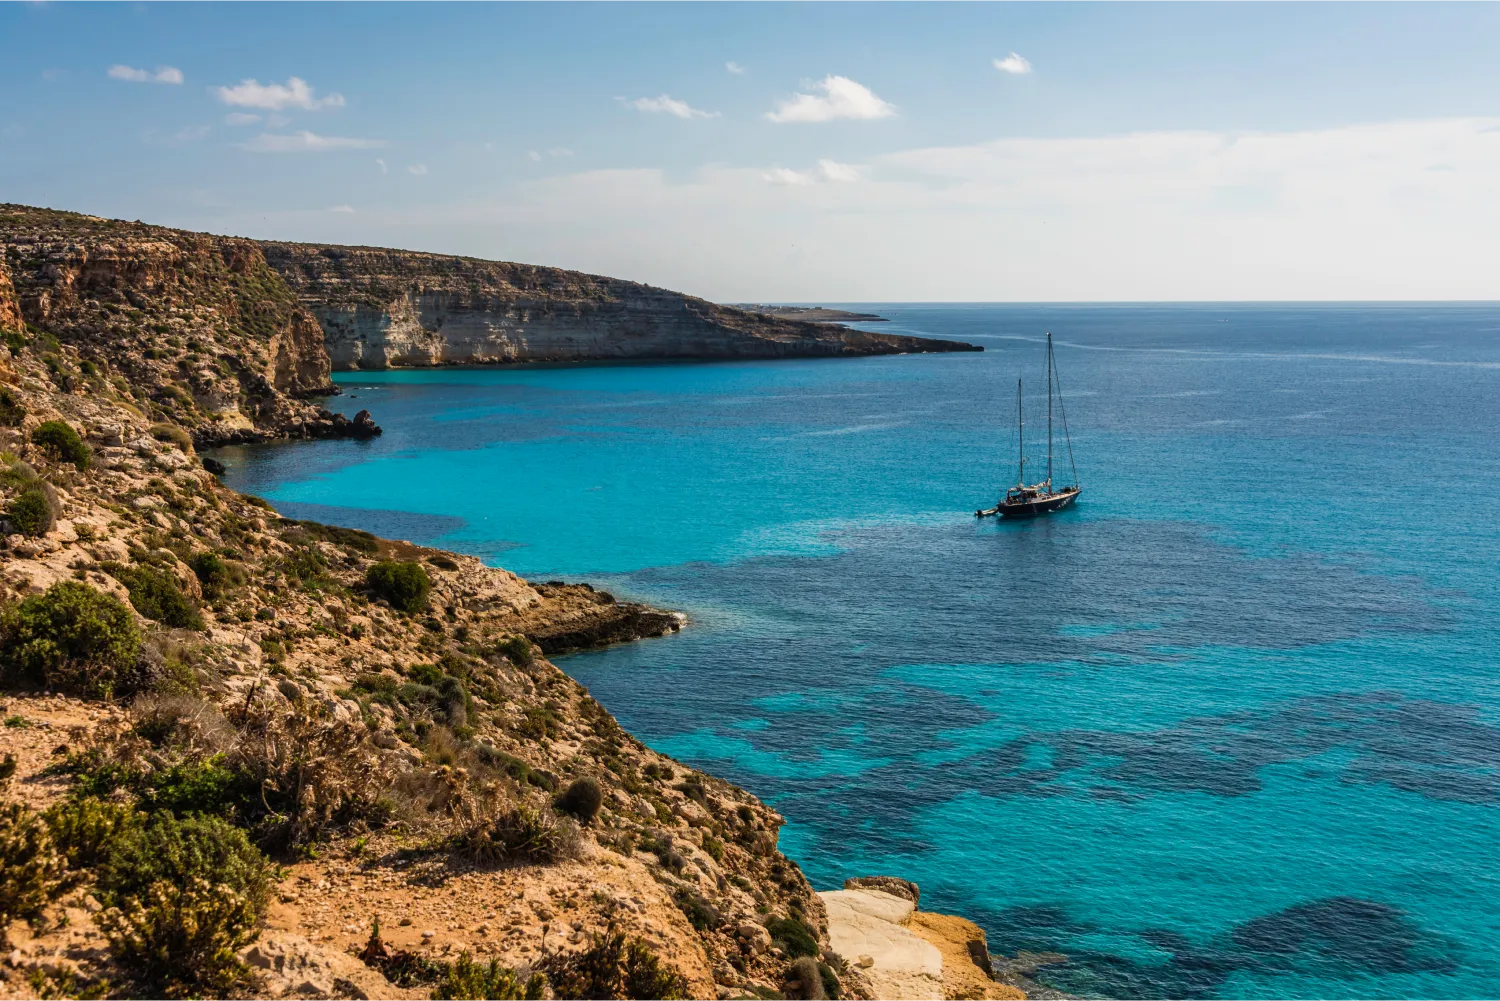 The extraordinary Rabbit Beach In Lampedusa and a sailing boat departing